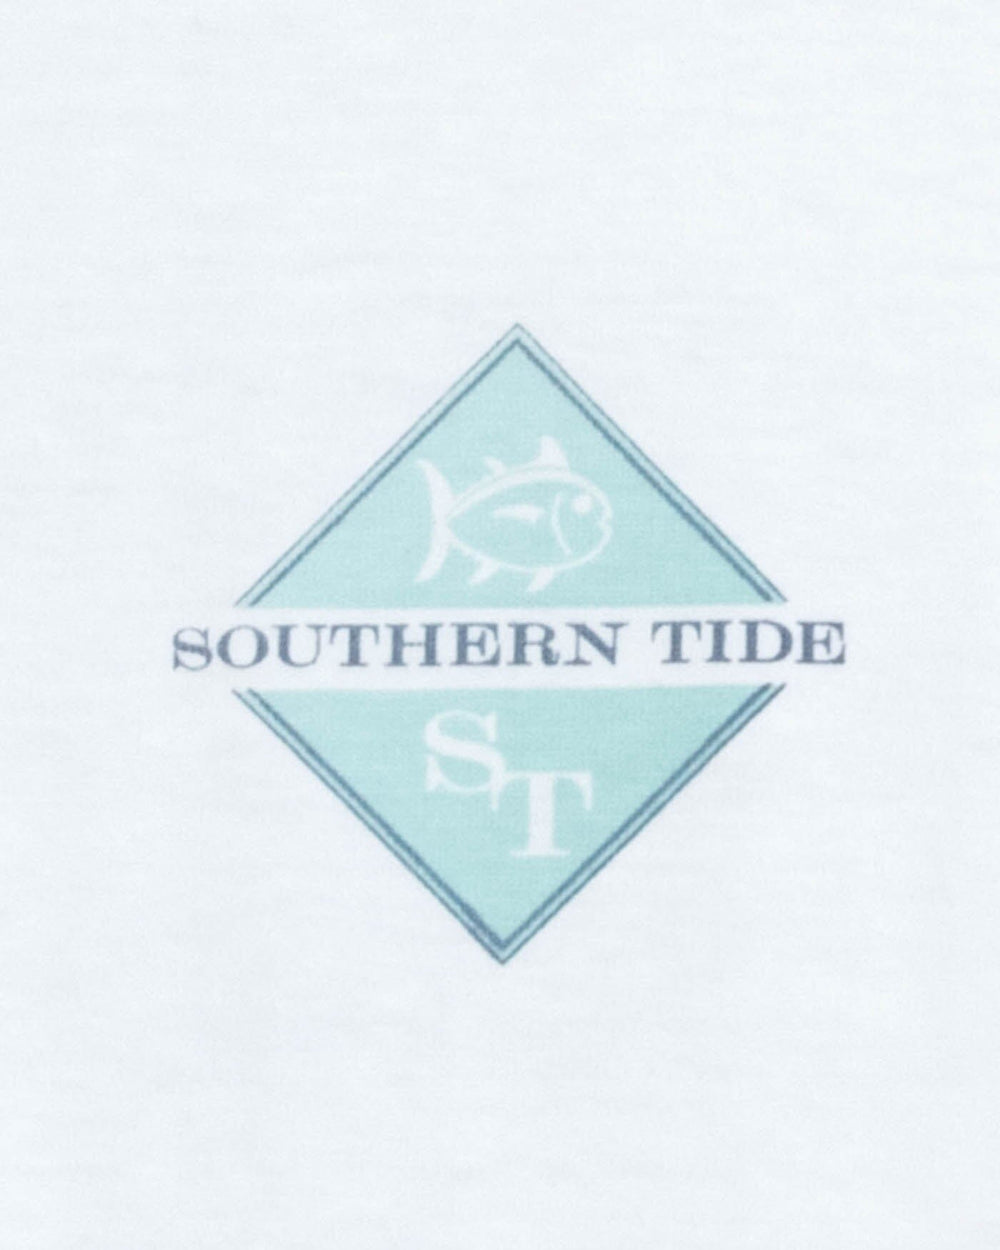 The detail view of the Southern Tide Diamond Sailing Short Sleeve T-shirt by Southern Tide - Classic White